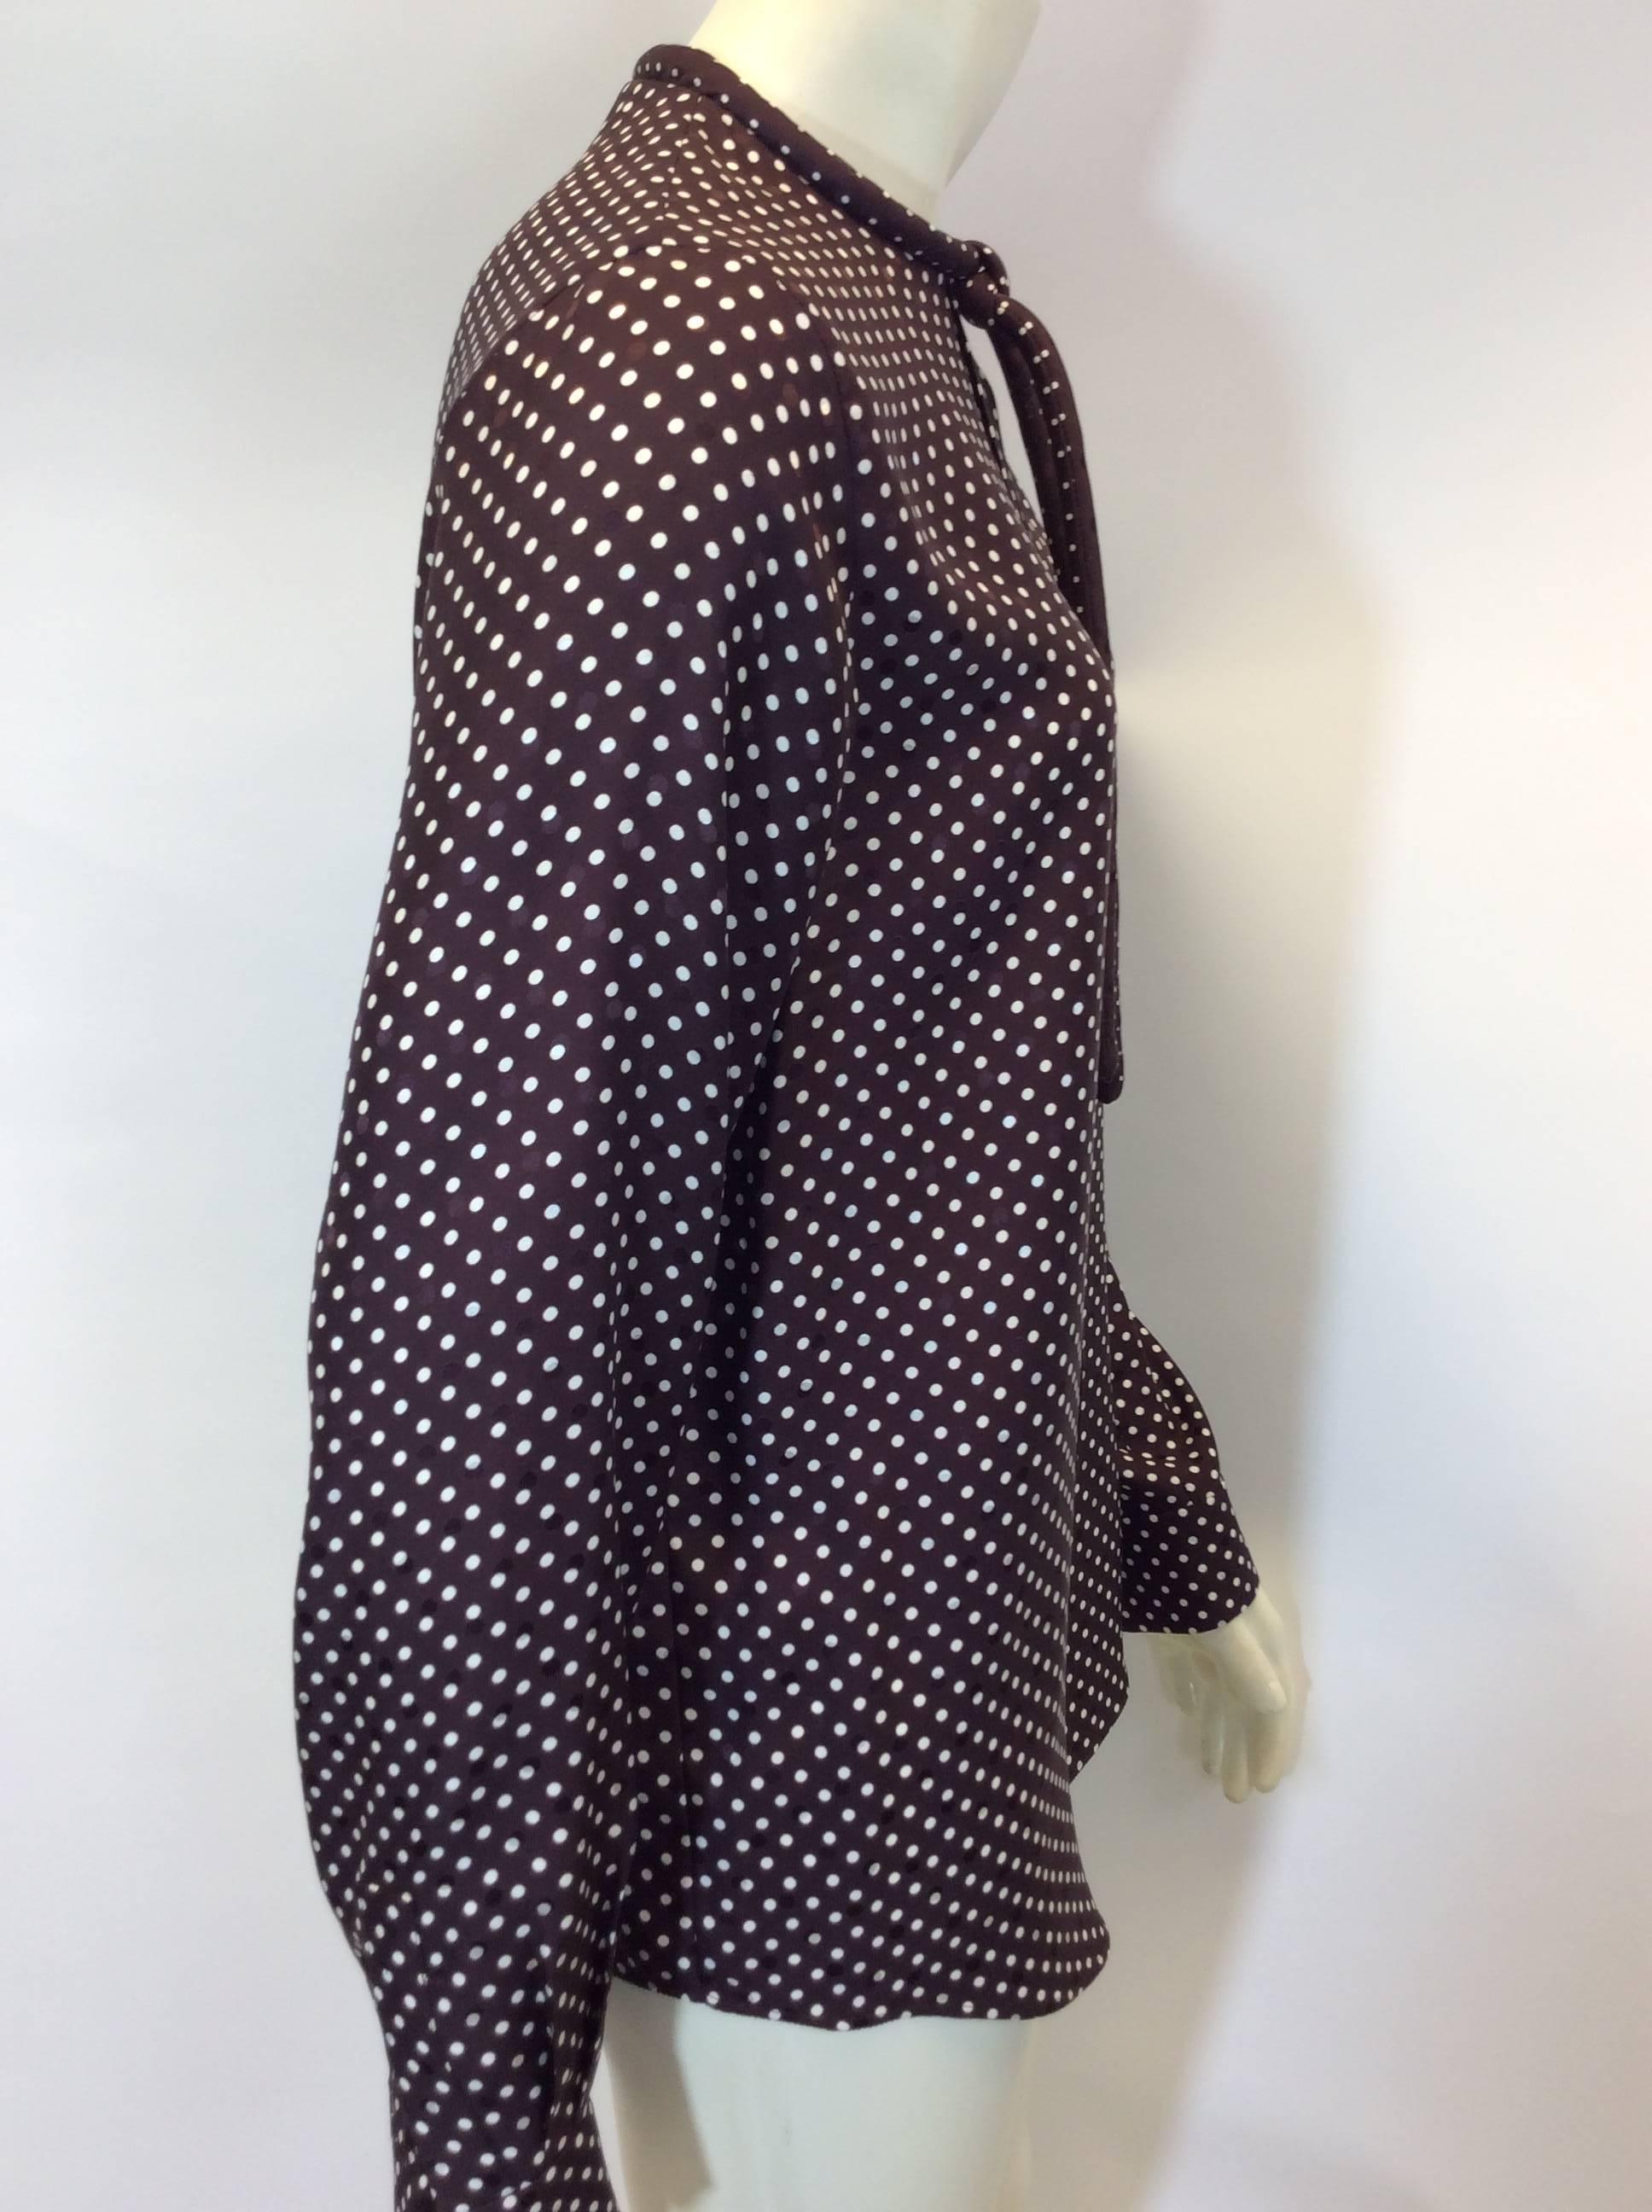 Brown Polka Dot Blouse with Neck Tie
Corded tie detail on front neckline
Button closure on back neckline
One button closure on cuff
Size 38
100% Silk